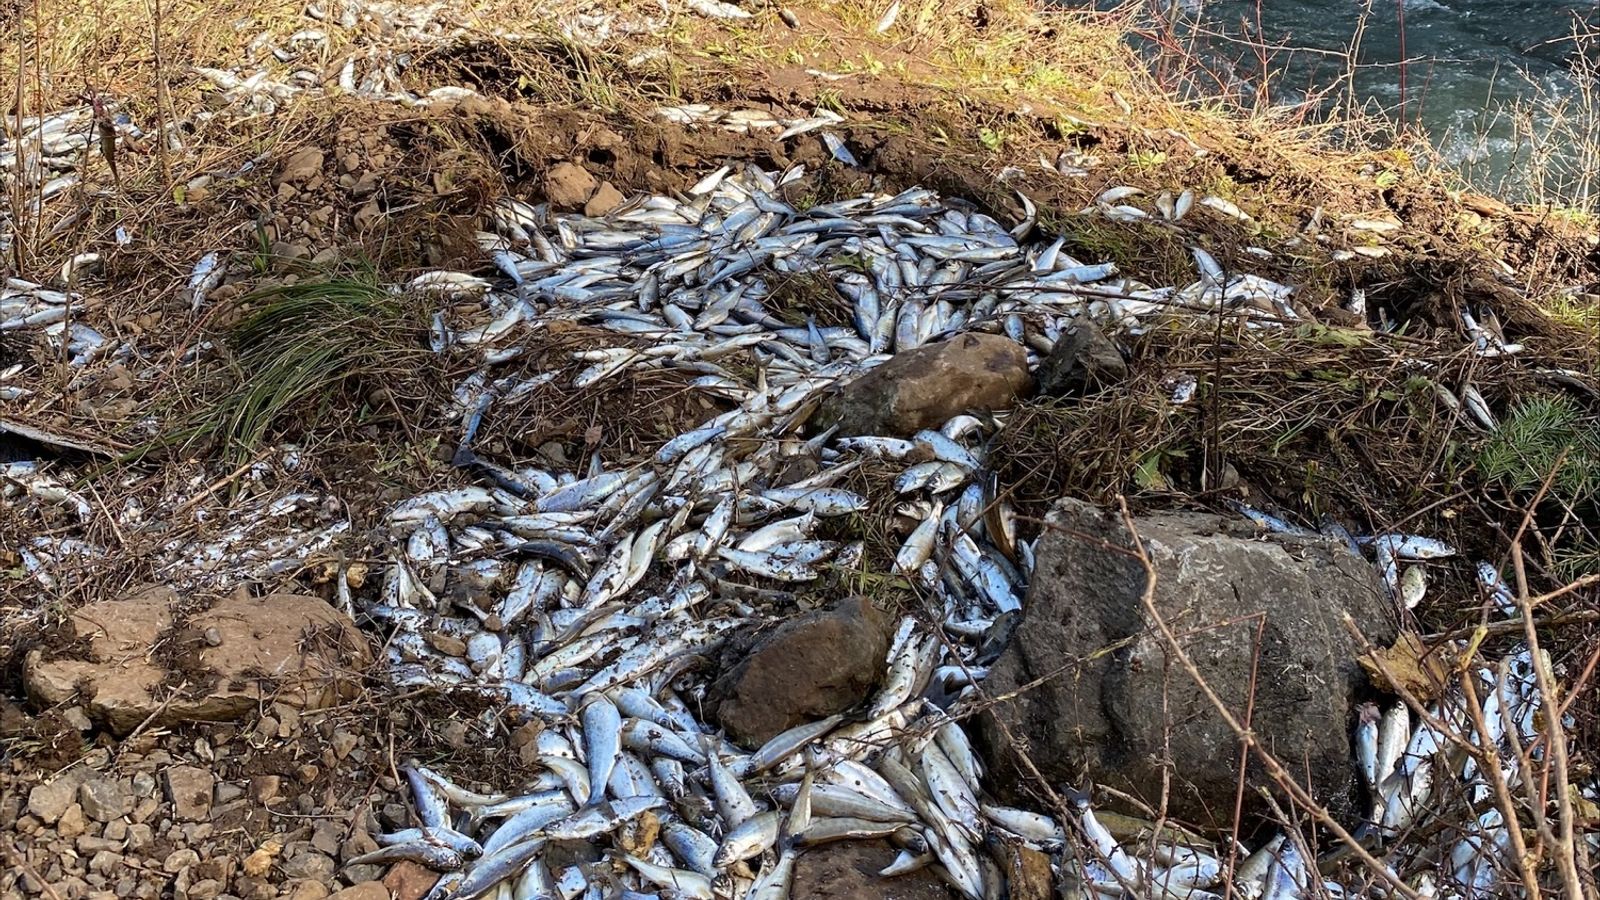 How 77,000 live salmon had a lucky escape after spilling out of a truck